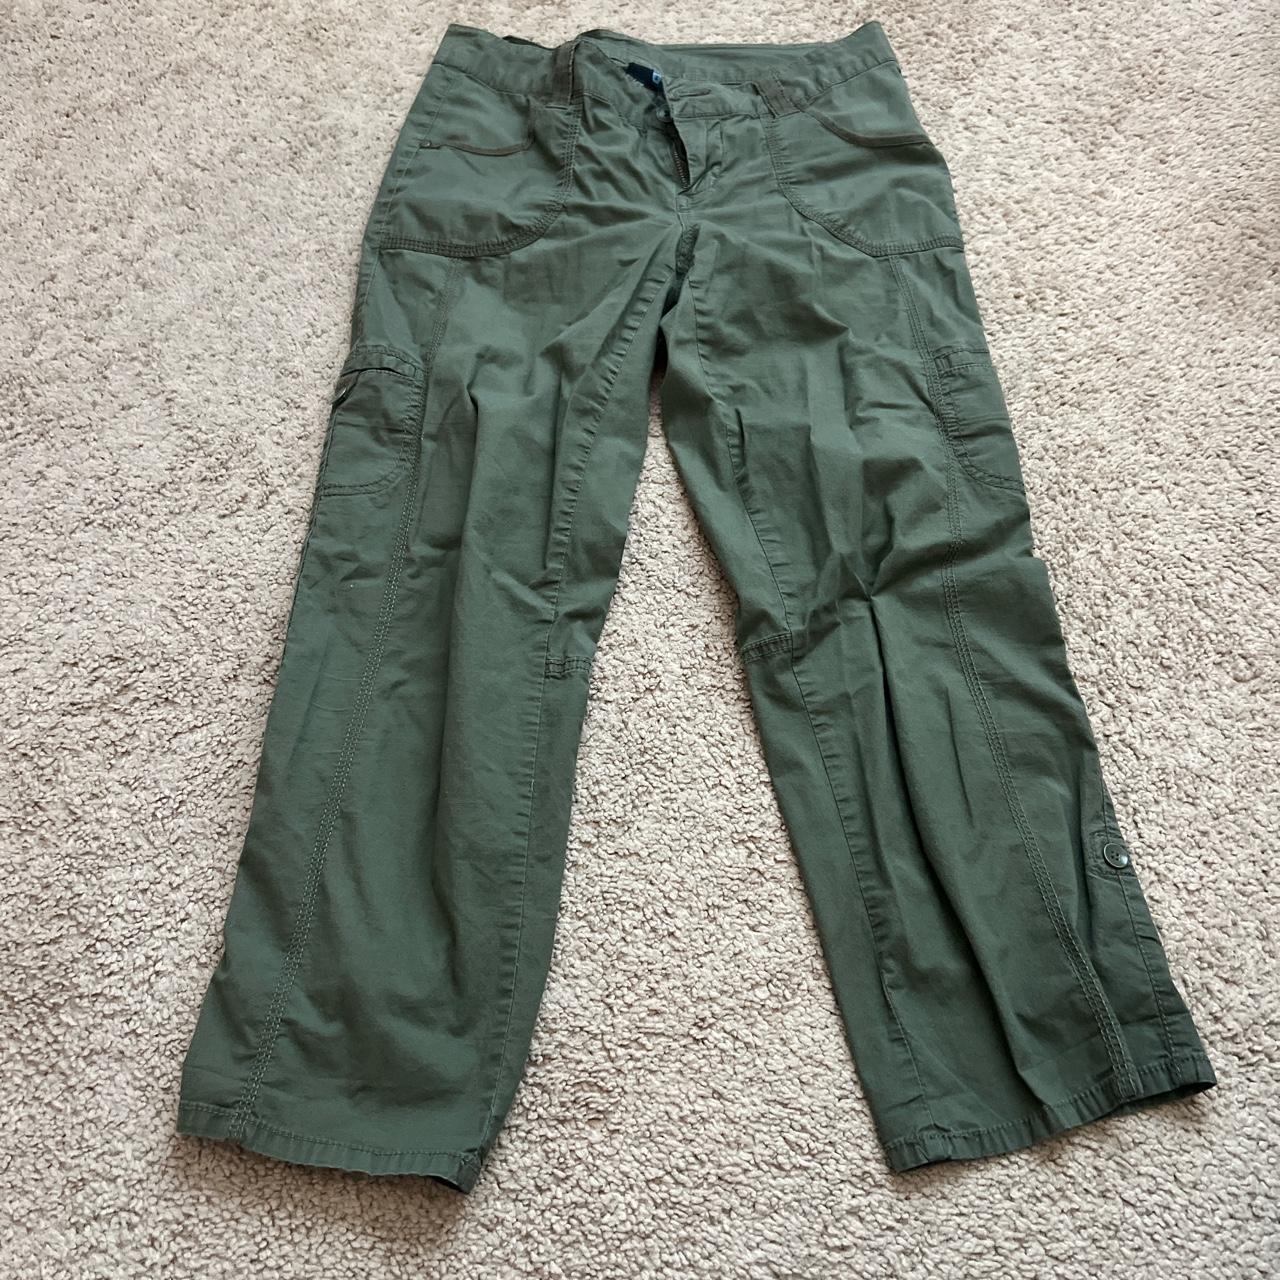 Green cargo pants Labeled size 6 but fit like a... - Depop